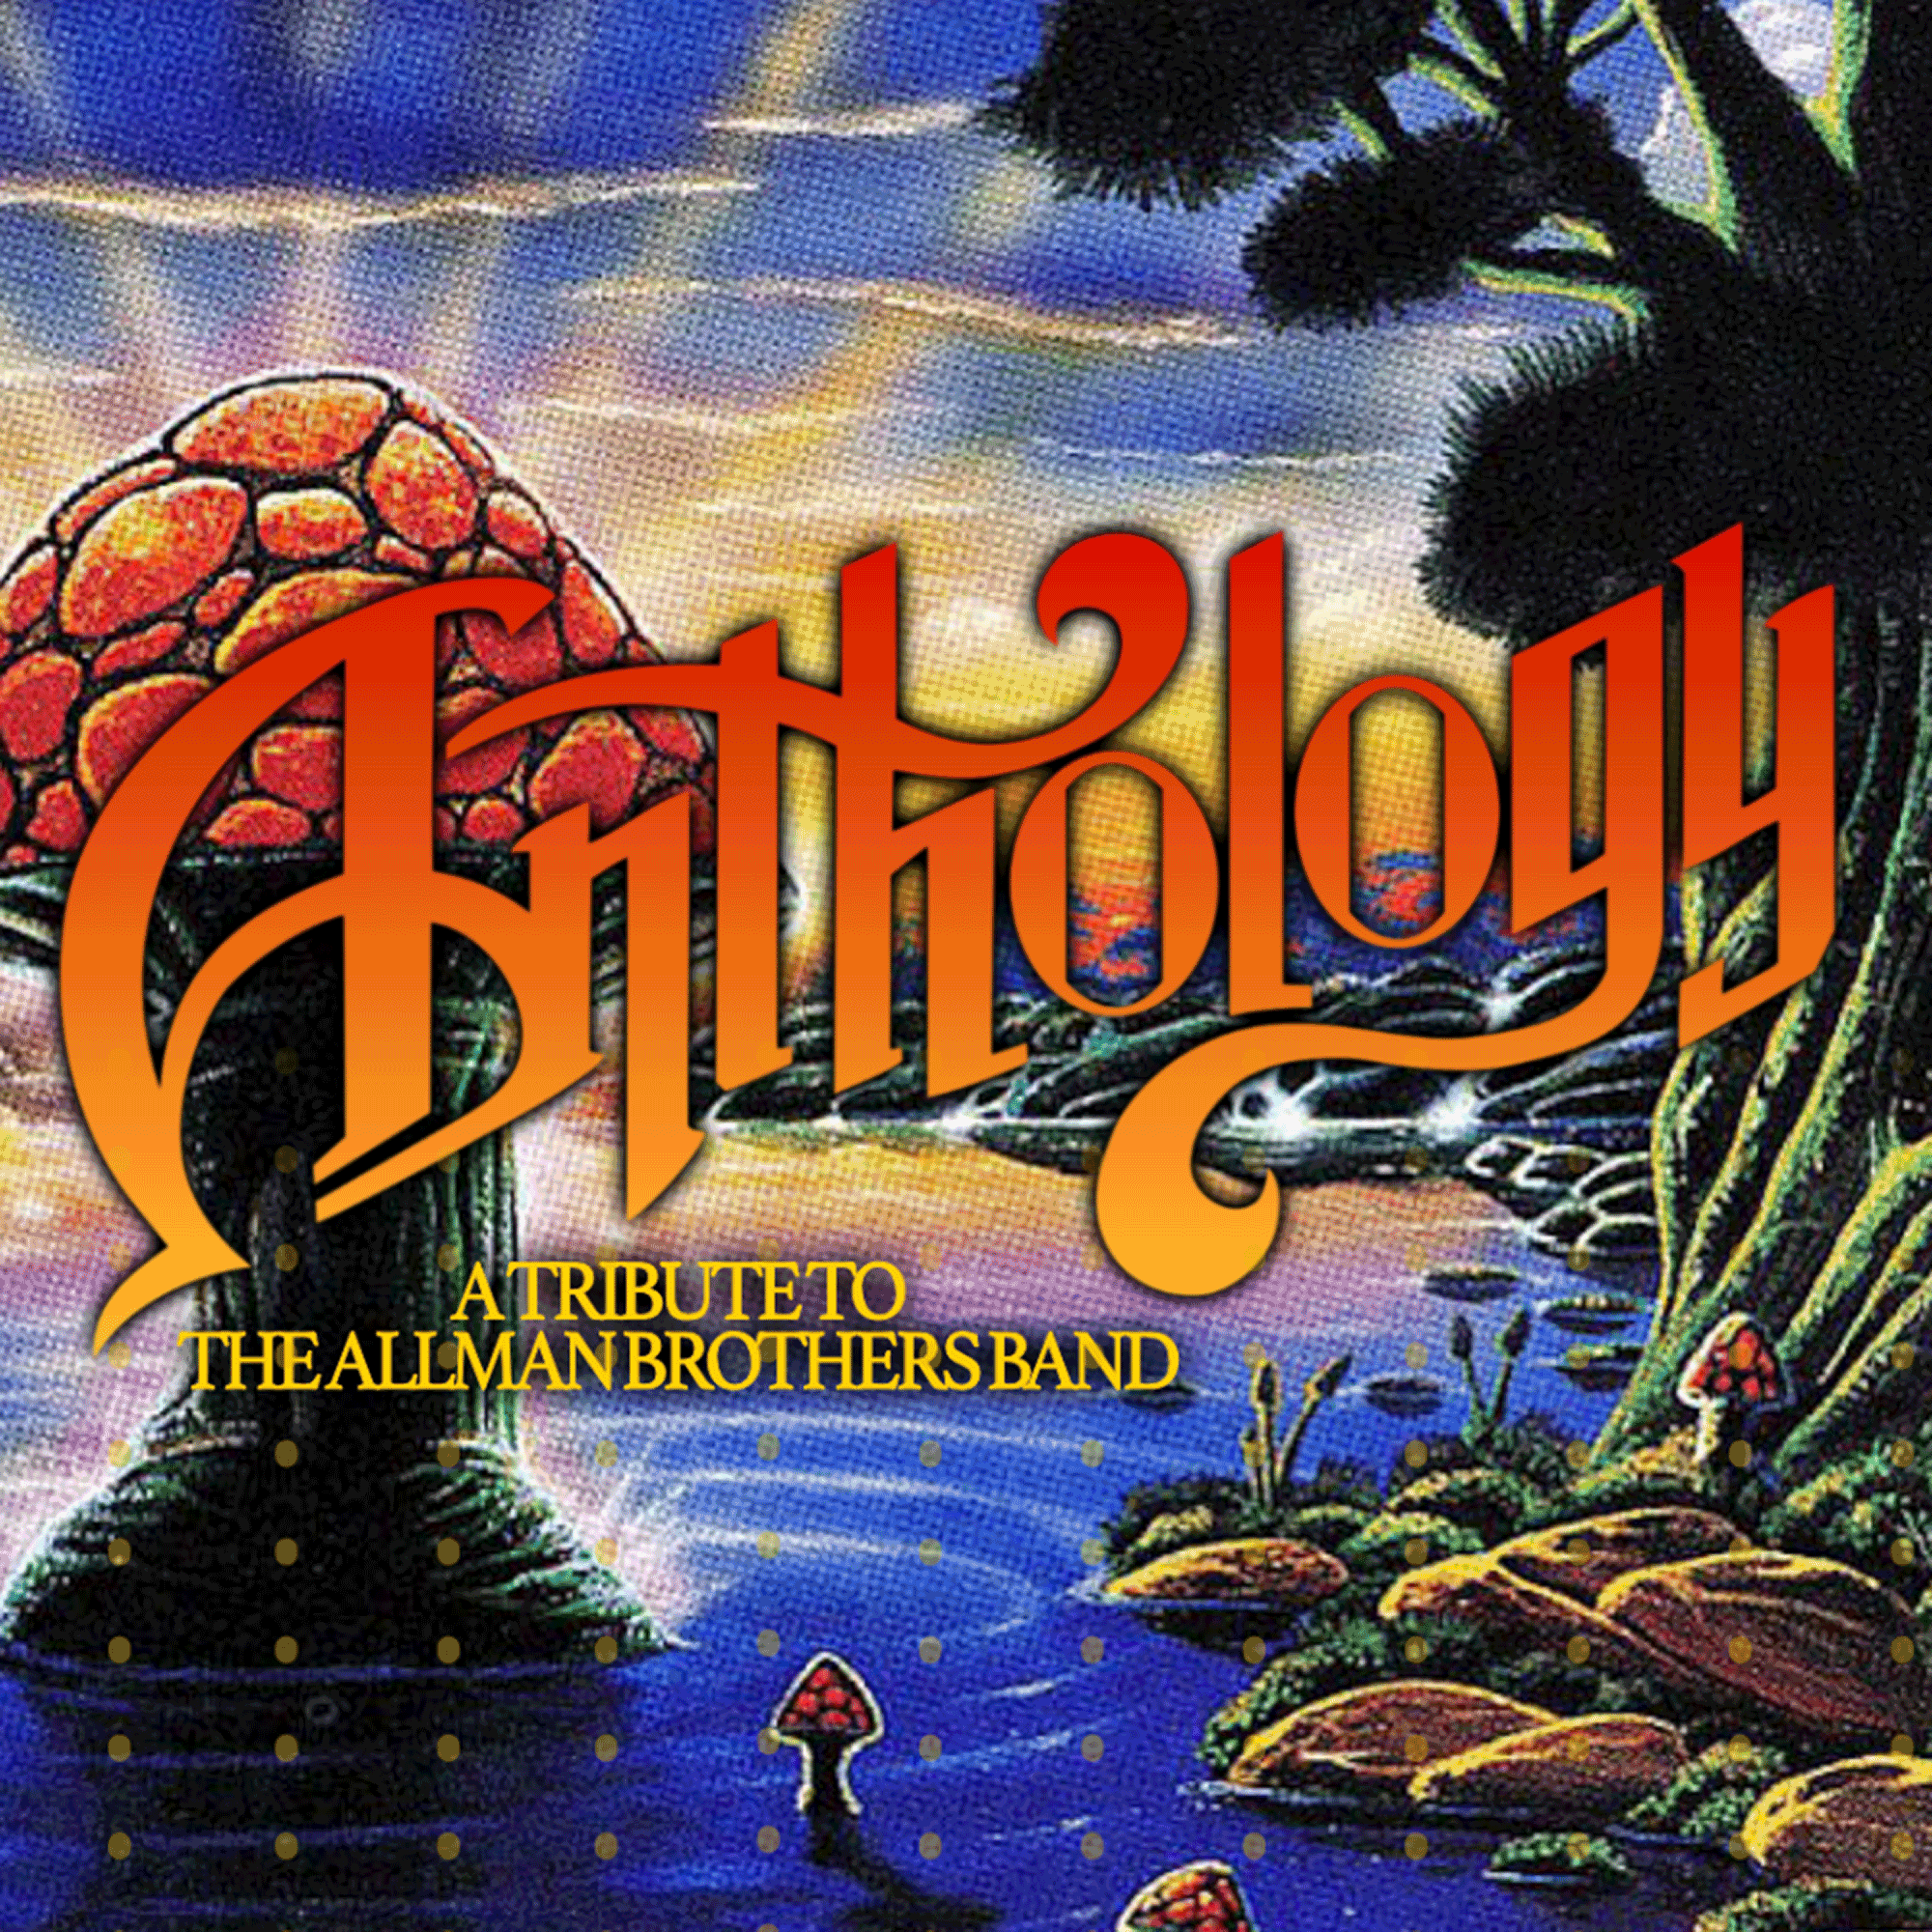 ANTHOLOGY - A TRIBUTE TO THE ALLMAN BROTHERS BAND at Impact Fuel Room